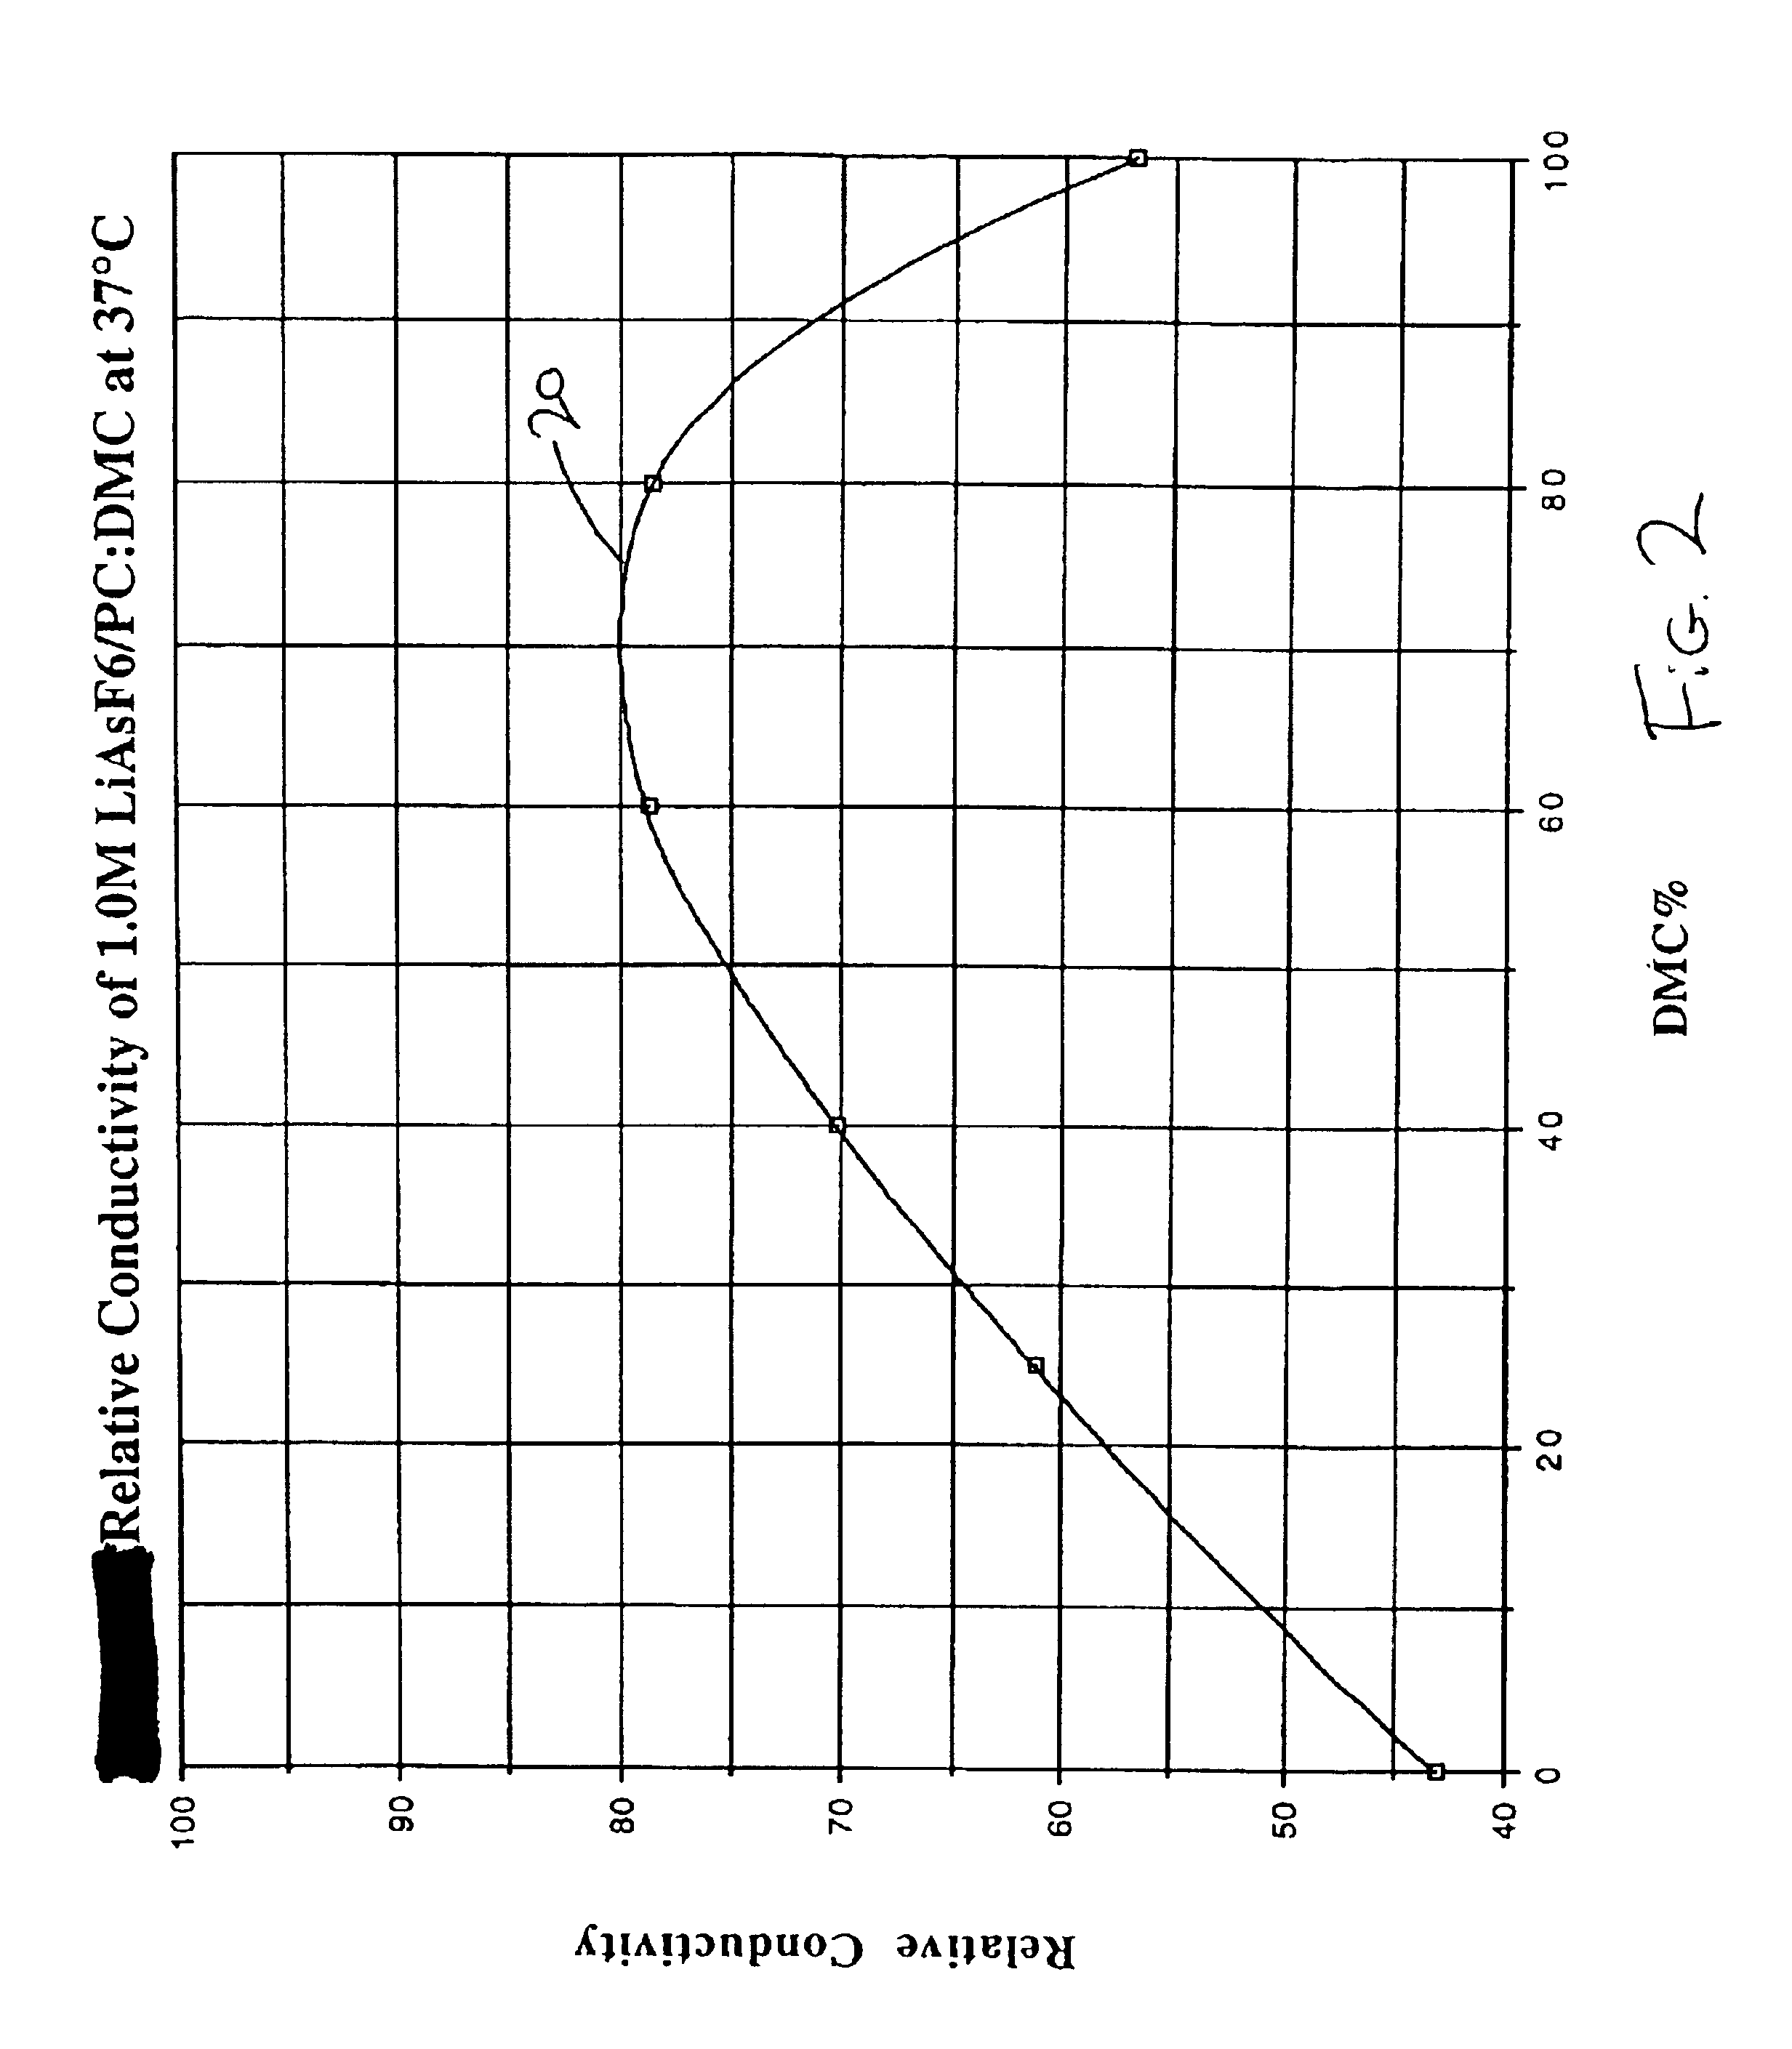 Highly conductive and stable nonaqueous electrolyte for lithium electrochemical cells